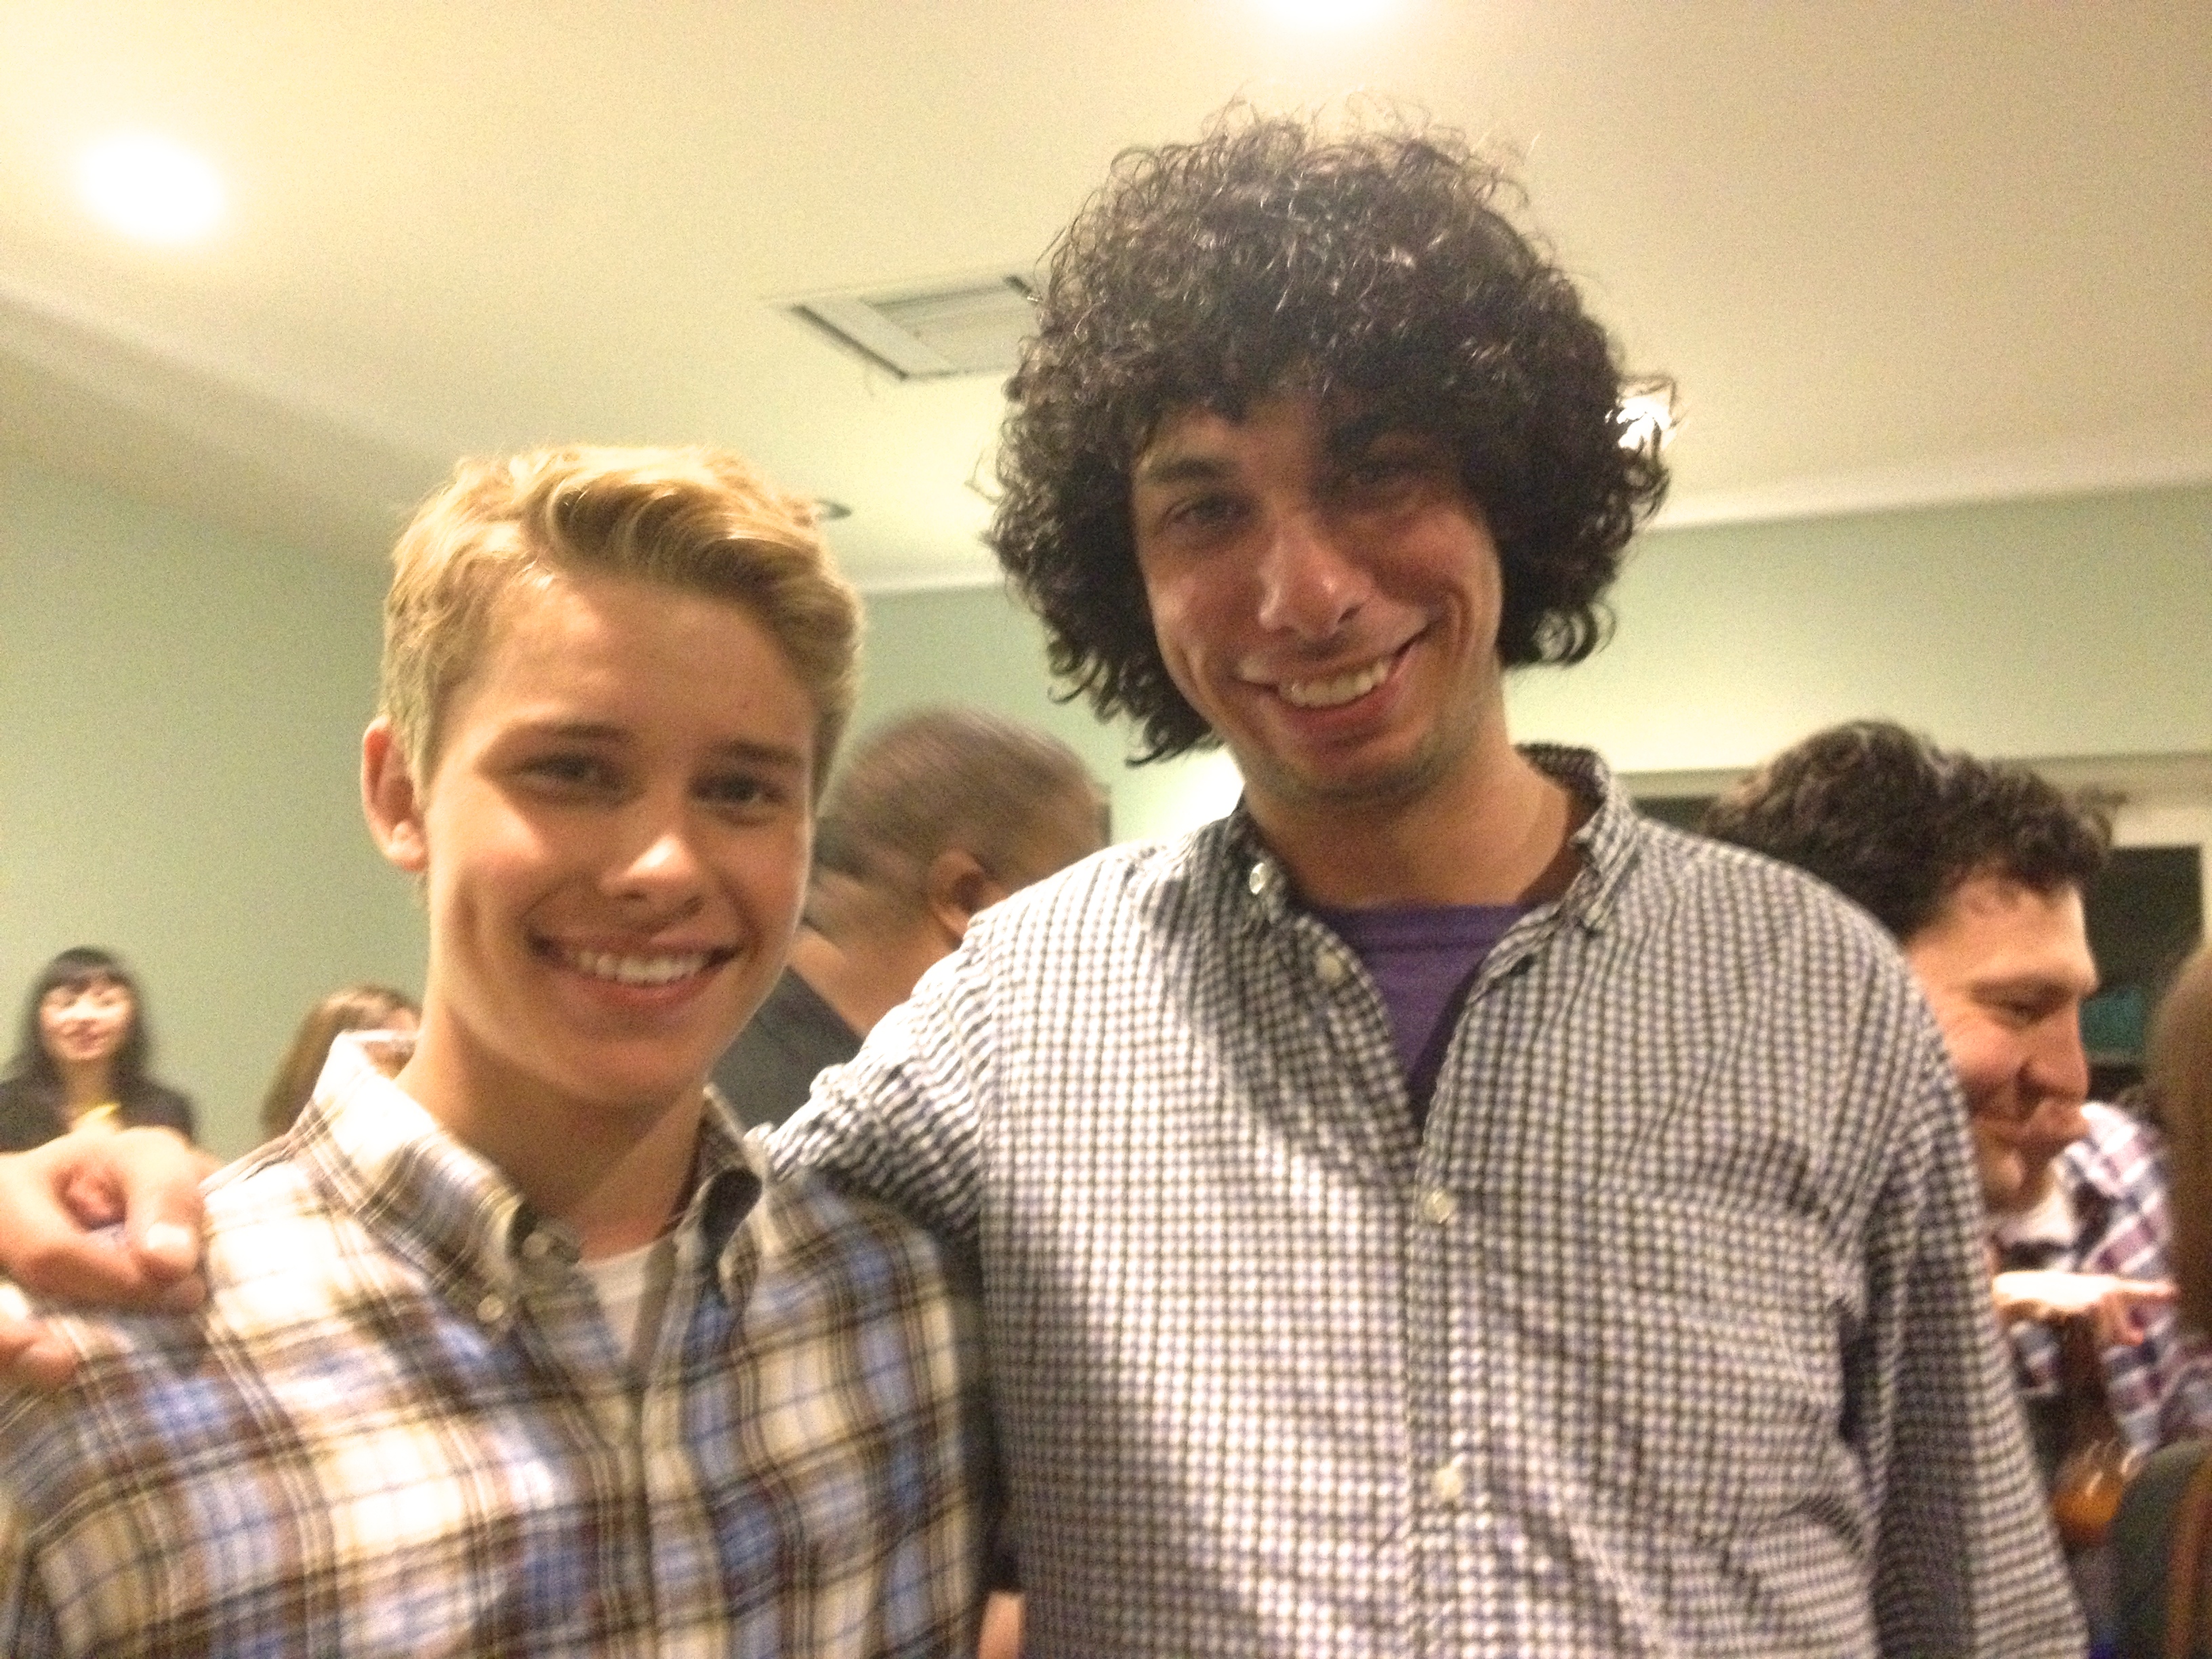 With Director, Luke Matheny at Screening for Gortimer Gibbons